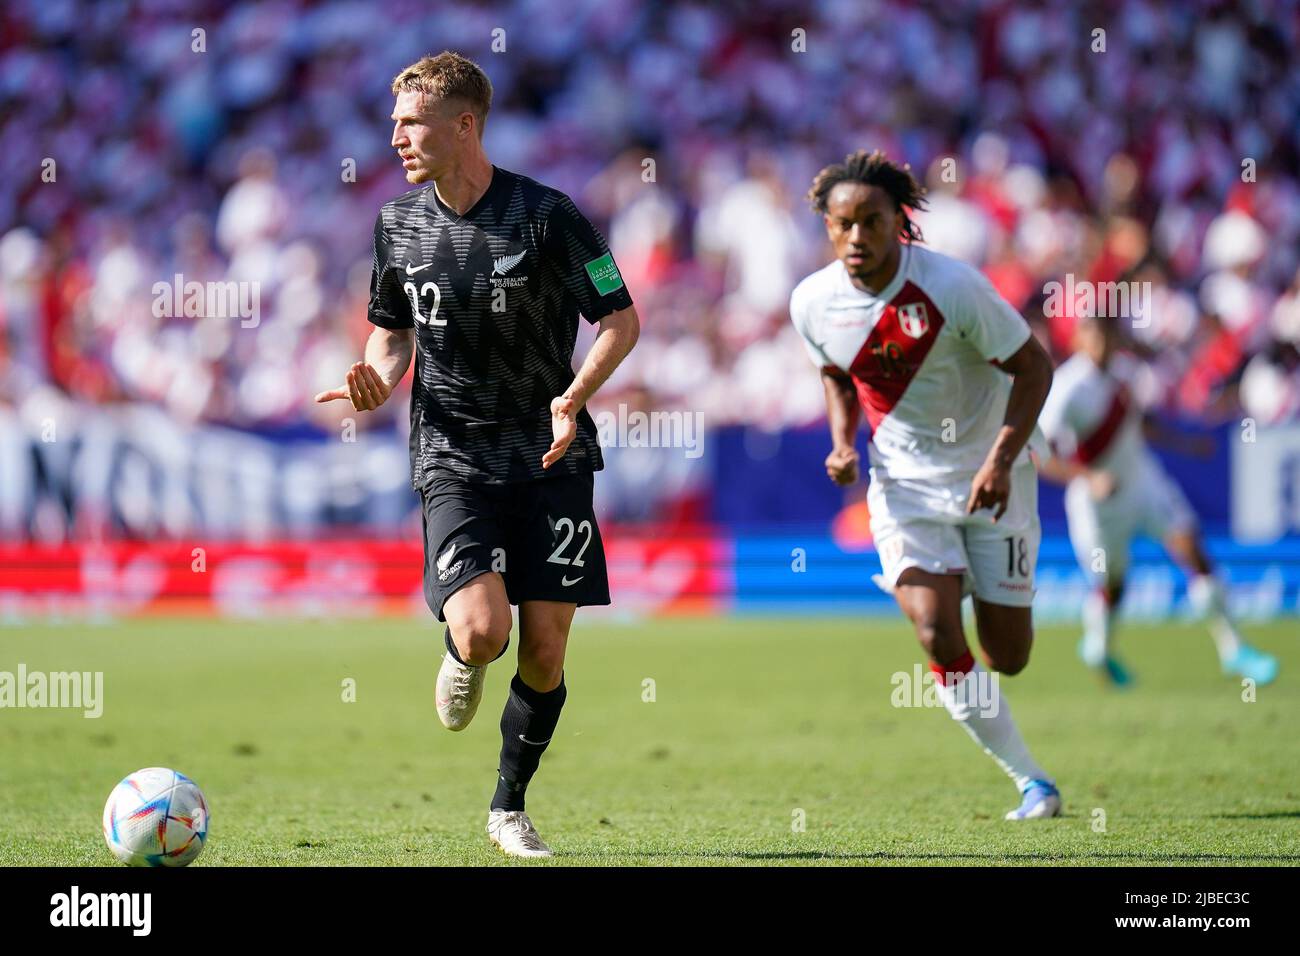 Barcelona, Spain. June 5, 2022, Niko Kirwan of New Zealand during the friendly match between Peru and New Zealand played at RCDE Stadium on June 5, 2022 in Barcelona, Spain. (Photo by Bagu Blanco / PRESSINPHOTO) Stock Photo